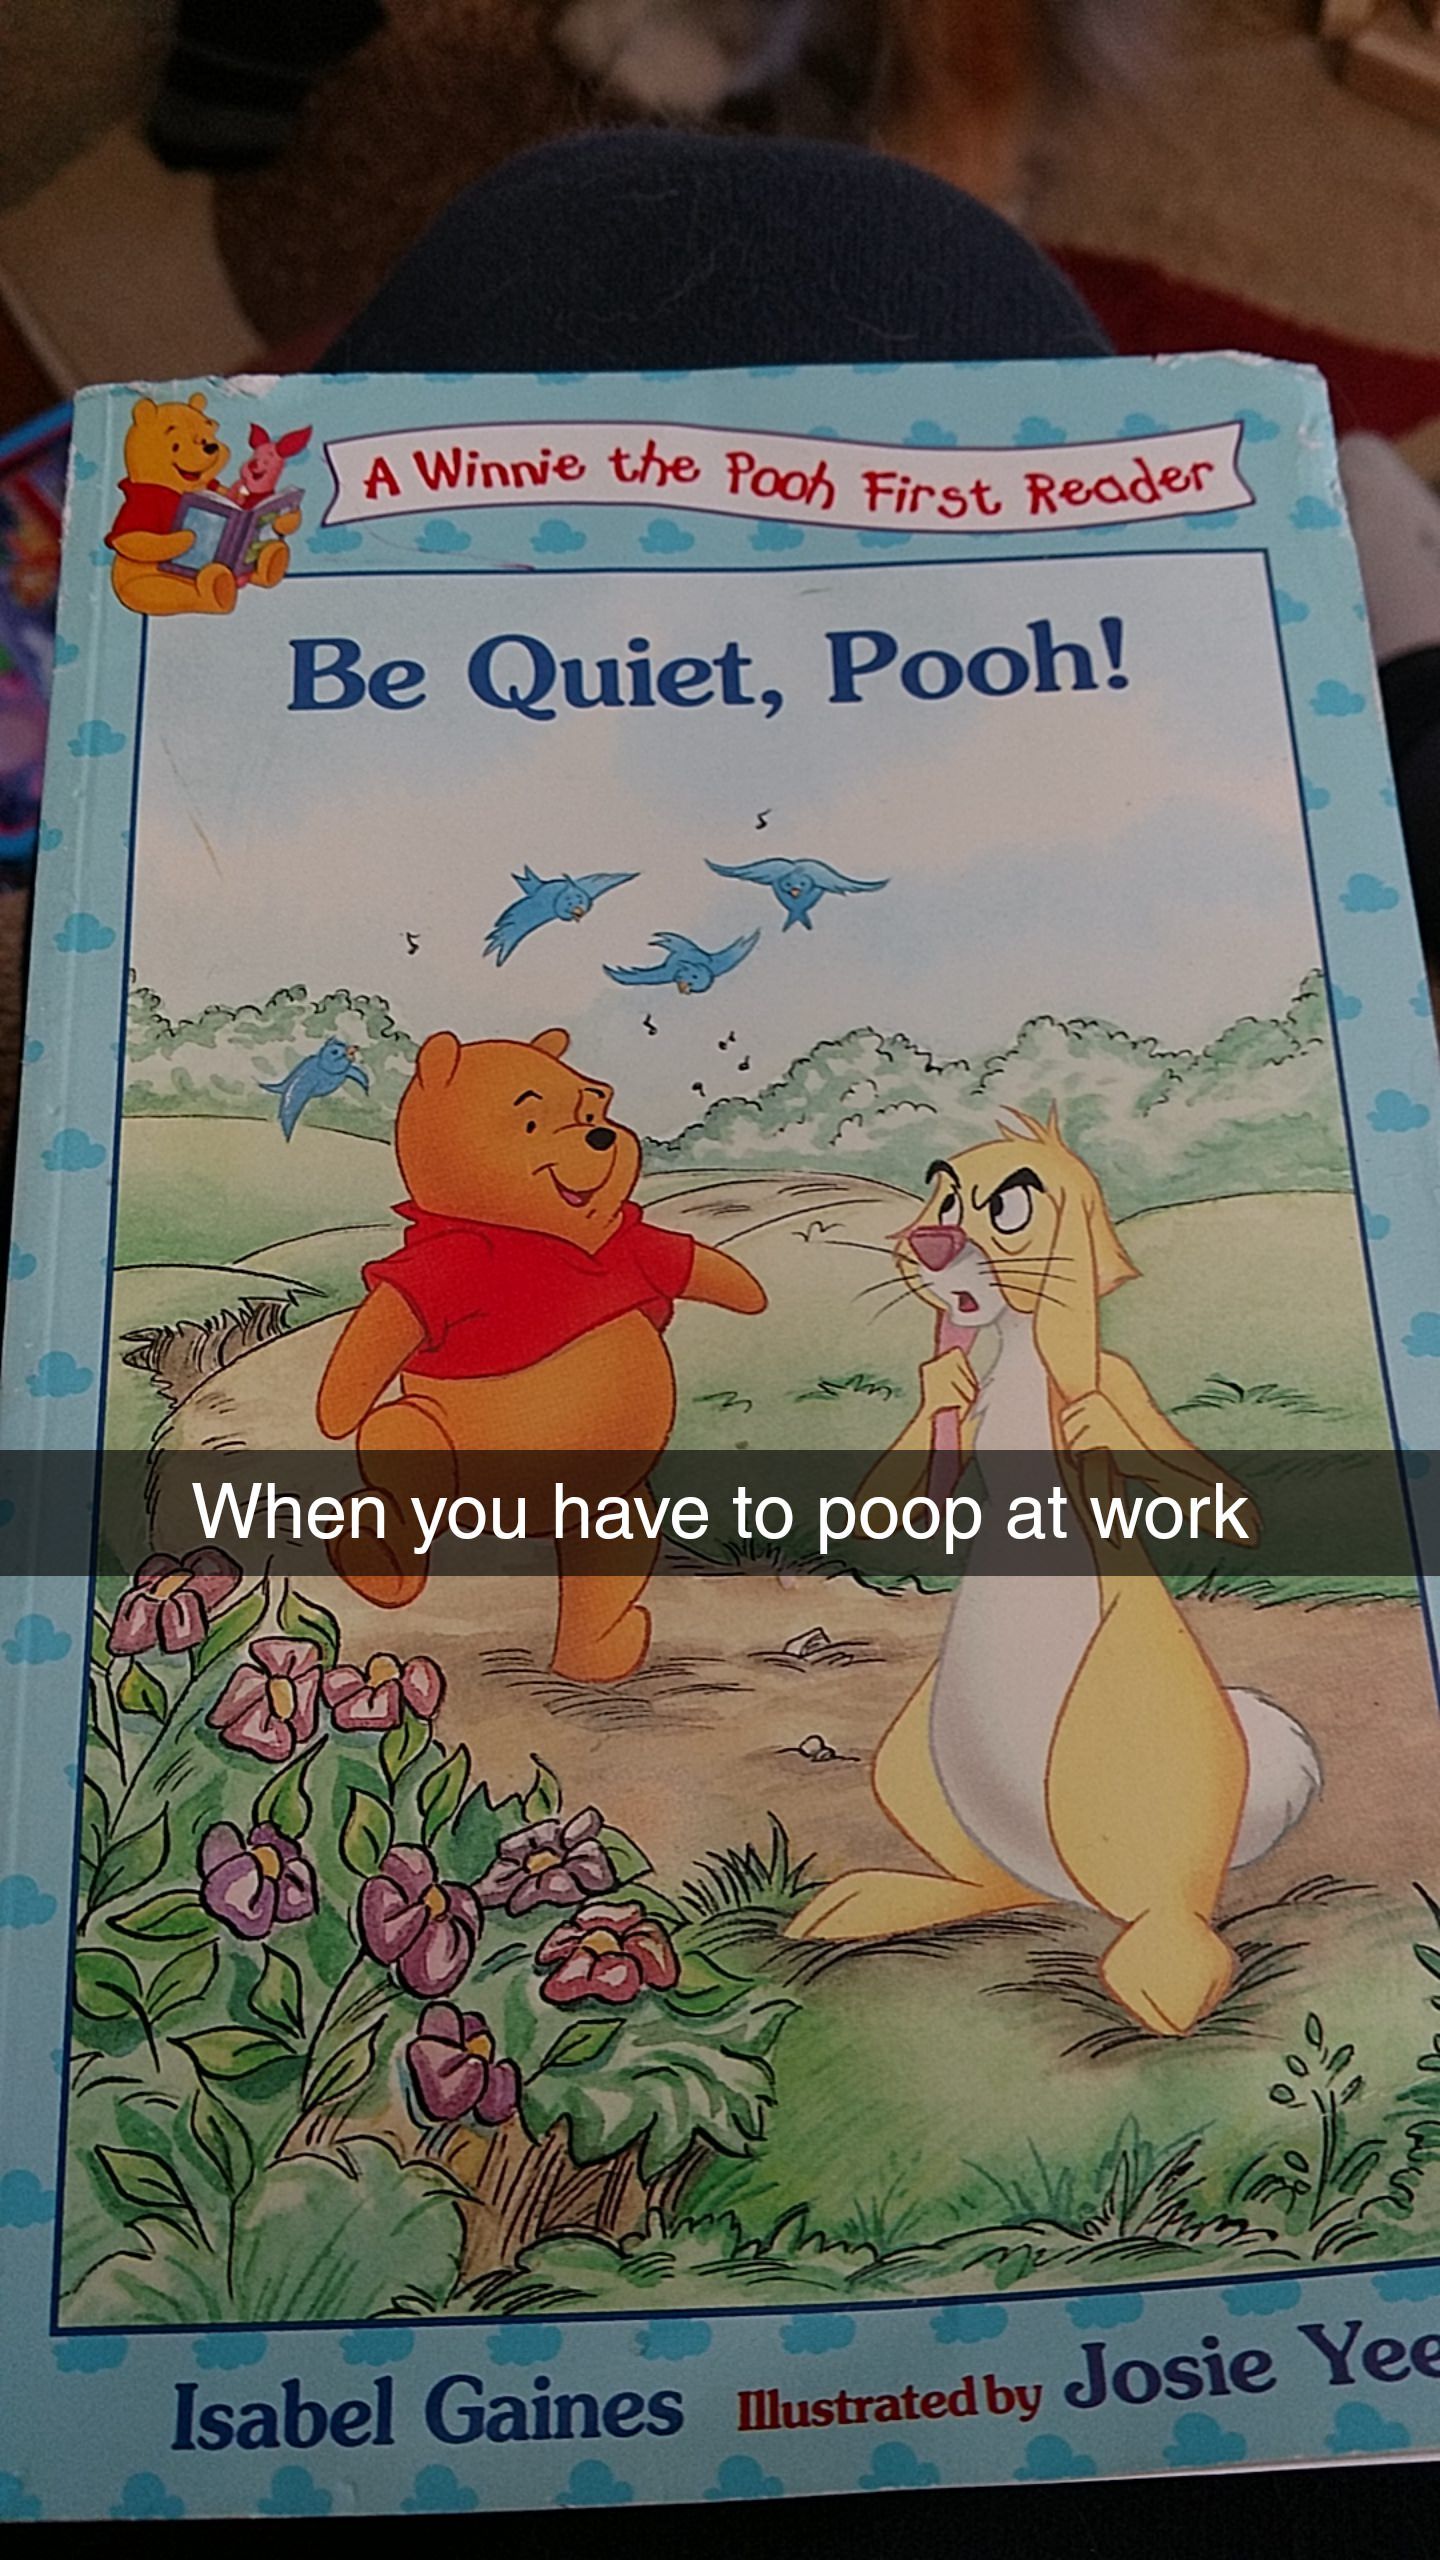 quiet pooh - Sa Wine the Pooh First Reader Be Quiet, Pooh! When you have to poop at work Isabel Gaines Illustrated by Josie Yee